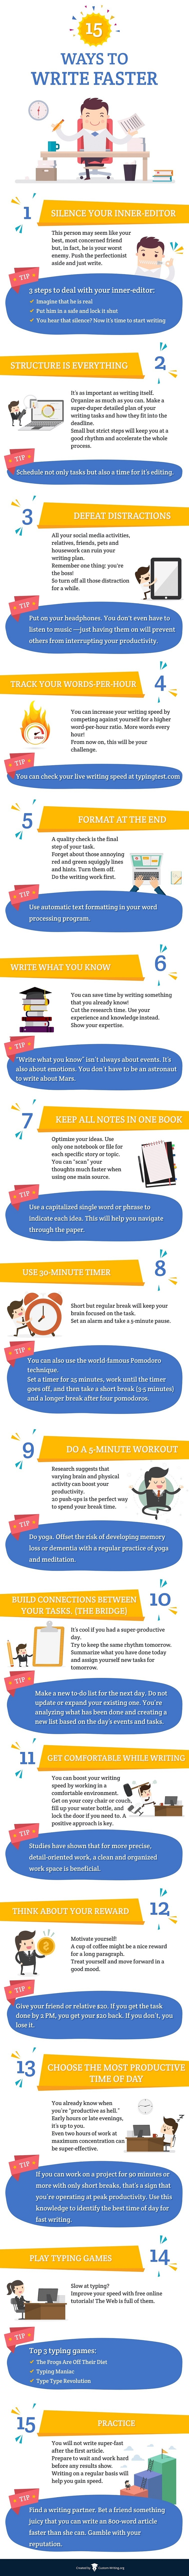 15 Amazing Ways to Become a Better Writer Infographic